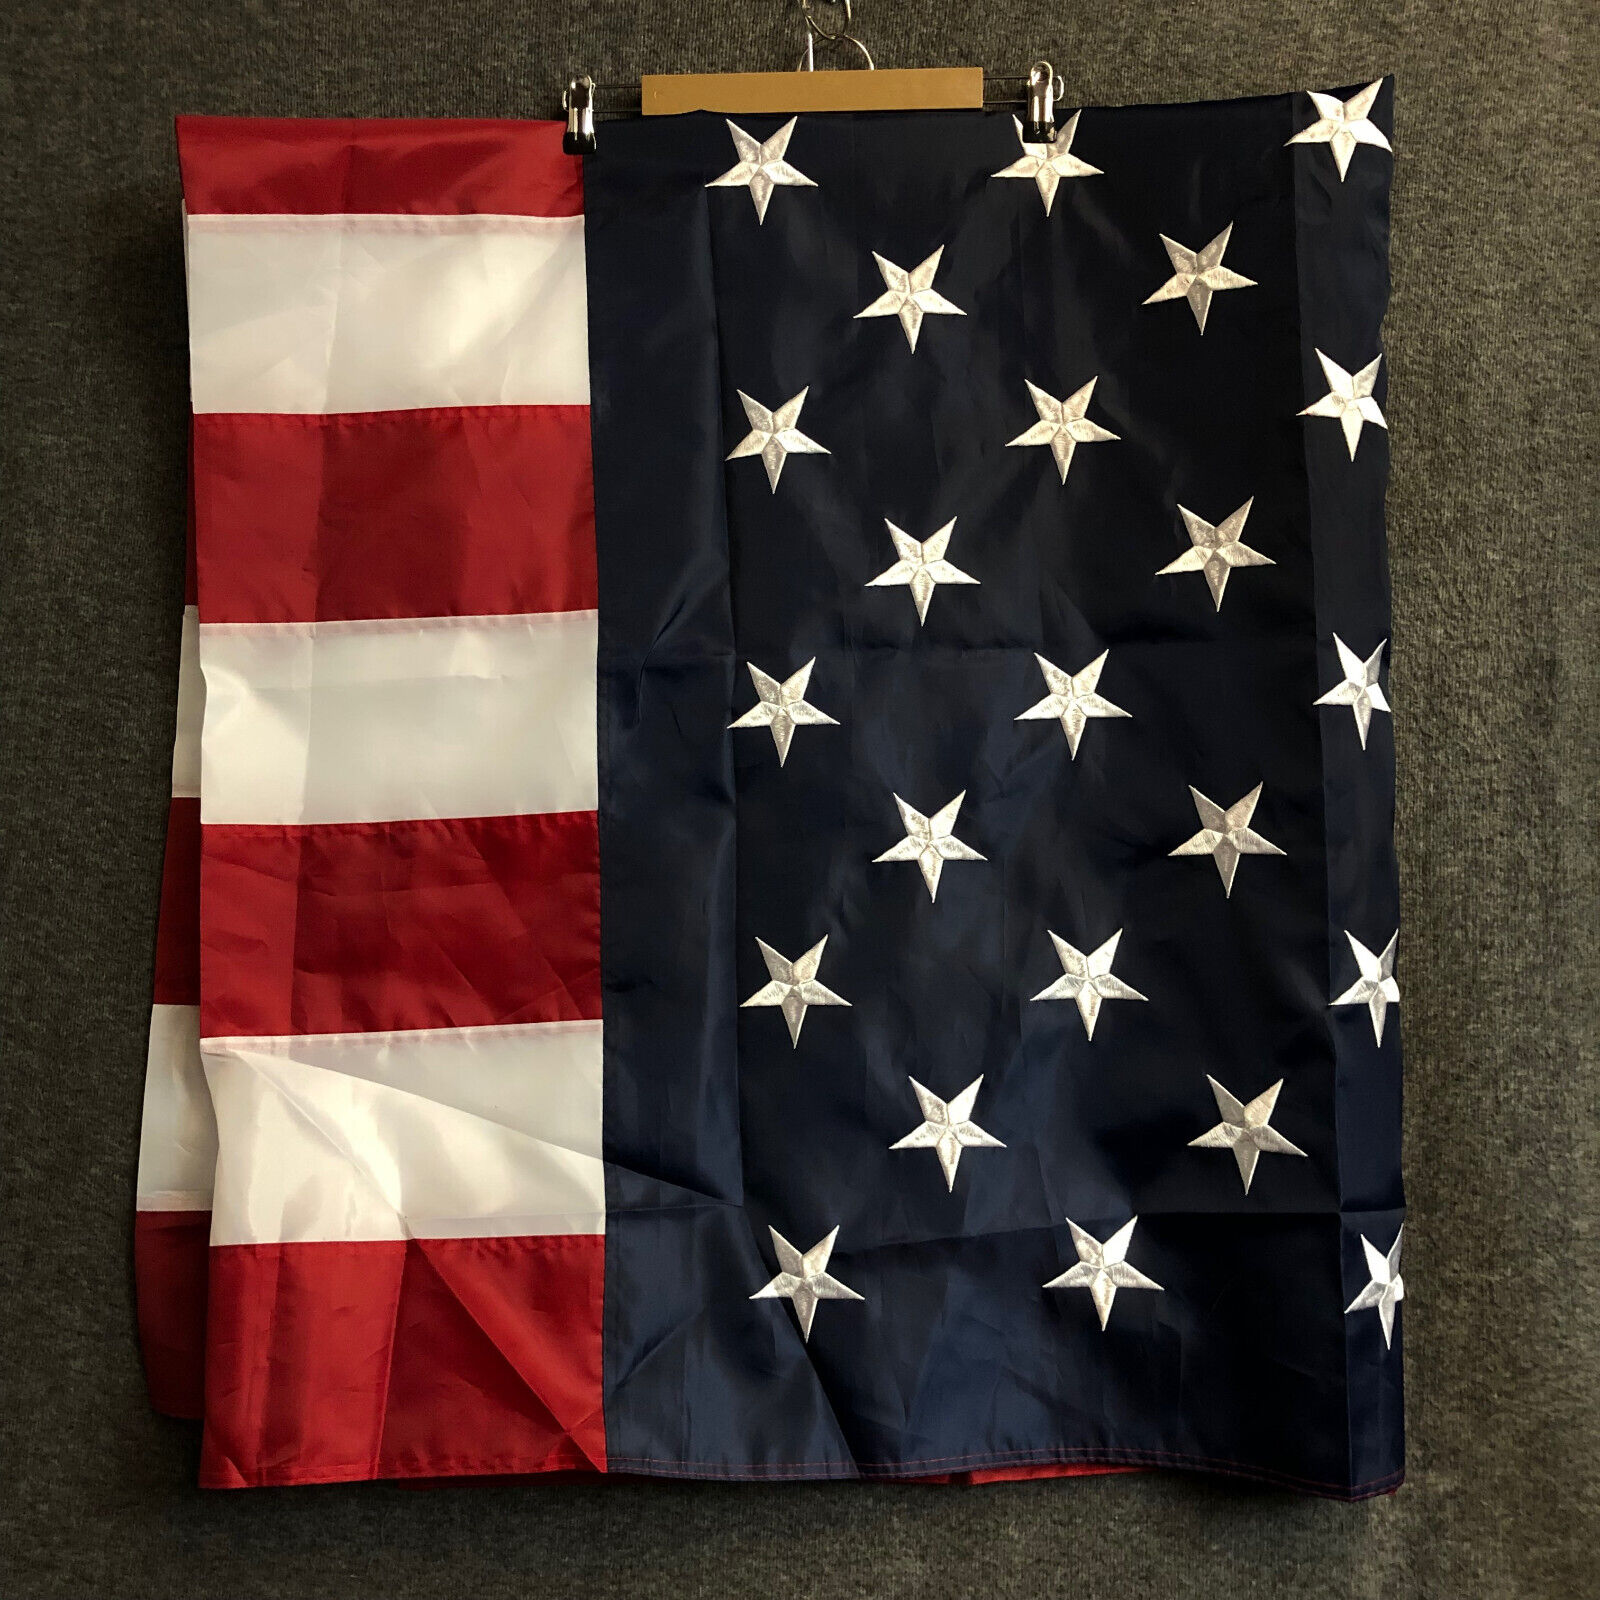 6x10 American Flag Outdoor Heavy Duty 100% Made in USA, US Flag 6x10 ft USA Flag